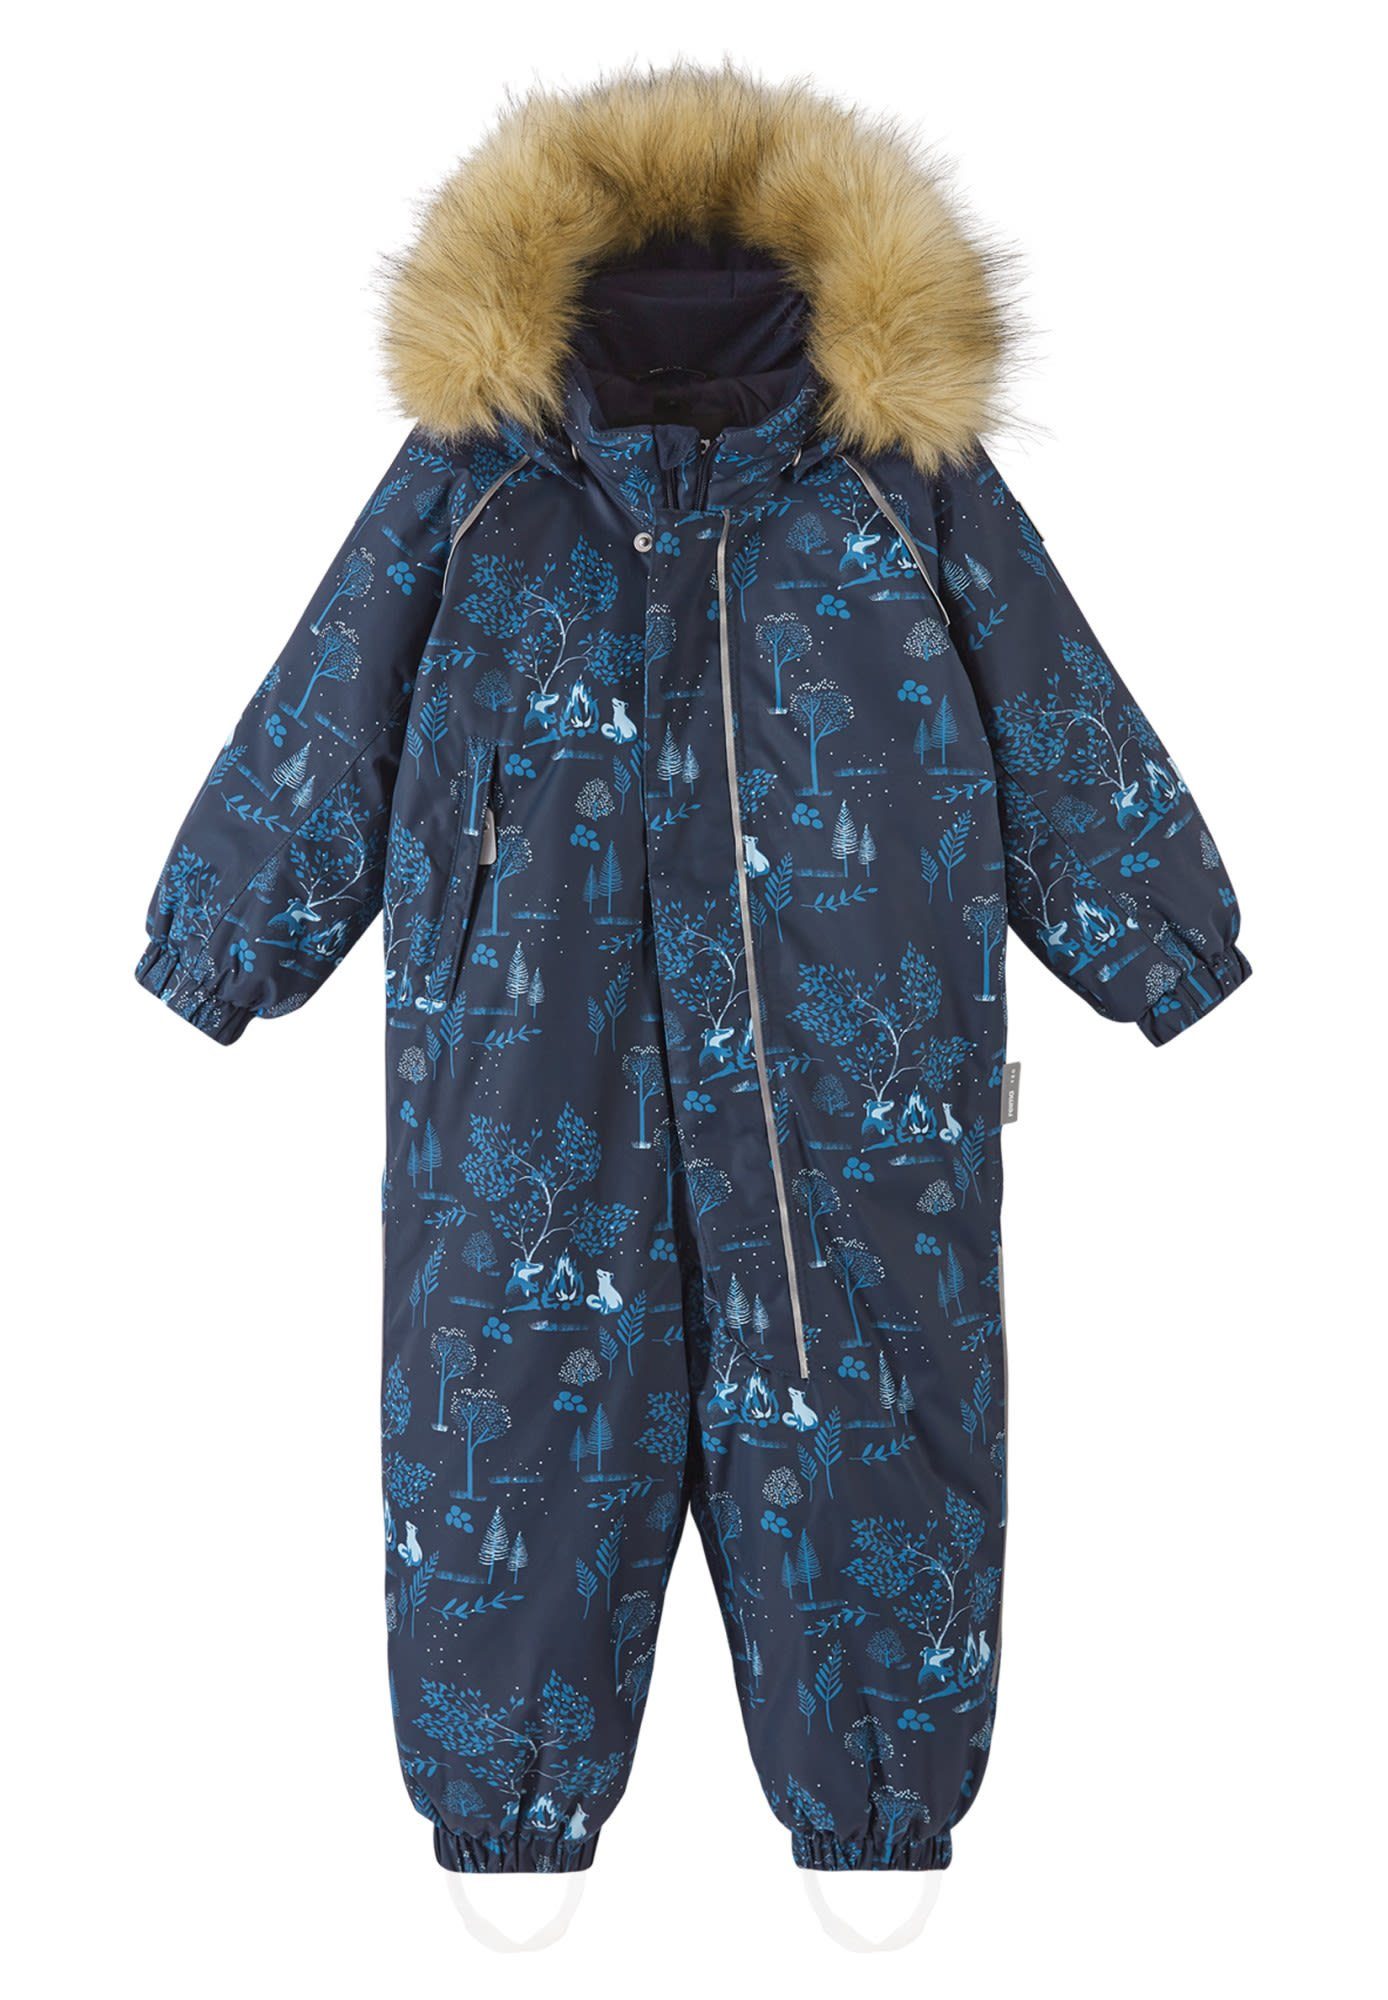 Toddlers Overall reima Kinder Reima Winter Lappi Navy Overall